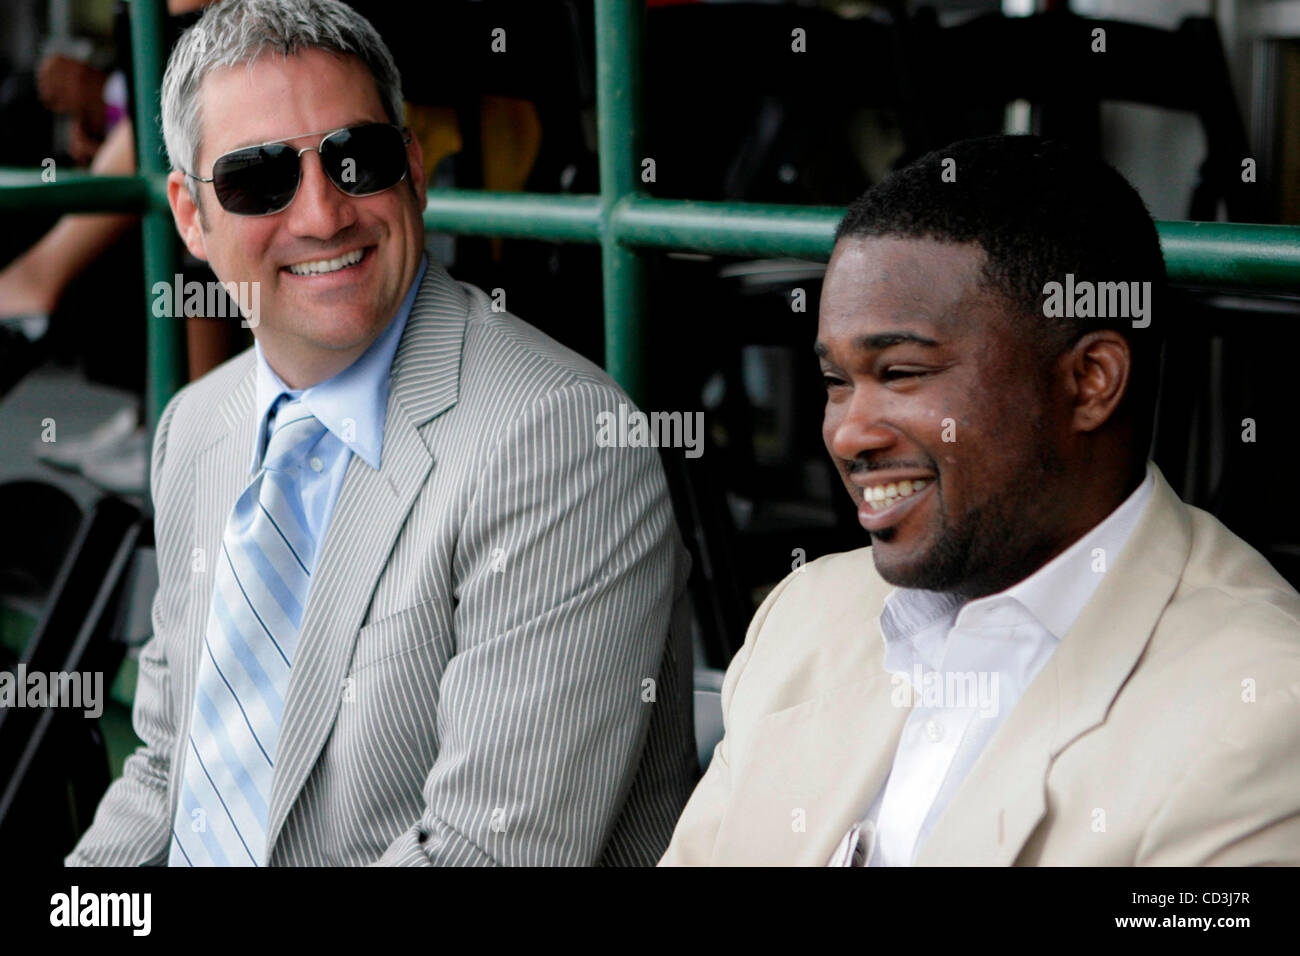 Singer Taylor Hicks sat with Levelle Little of St. Louis MO at the 134th running of the Kentucky Derby Saturday May 3, 2008, at Churchill Downs, Louisville, Ky. Hicks pick for the Derby was Denis of Cork.  'He's a long shot and I was s long shot so he's got a chance.'  Photo by Angela Shoemaker Stock Photo